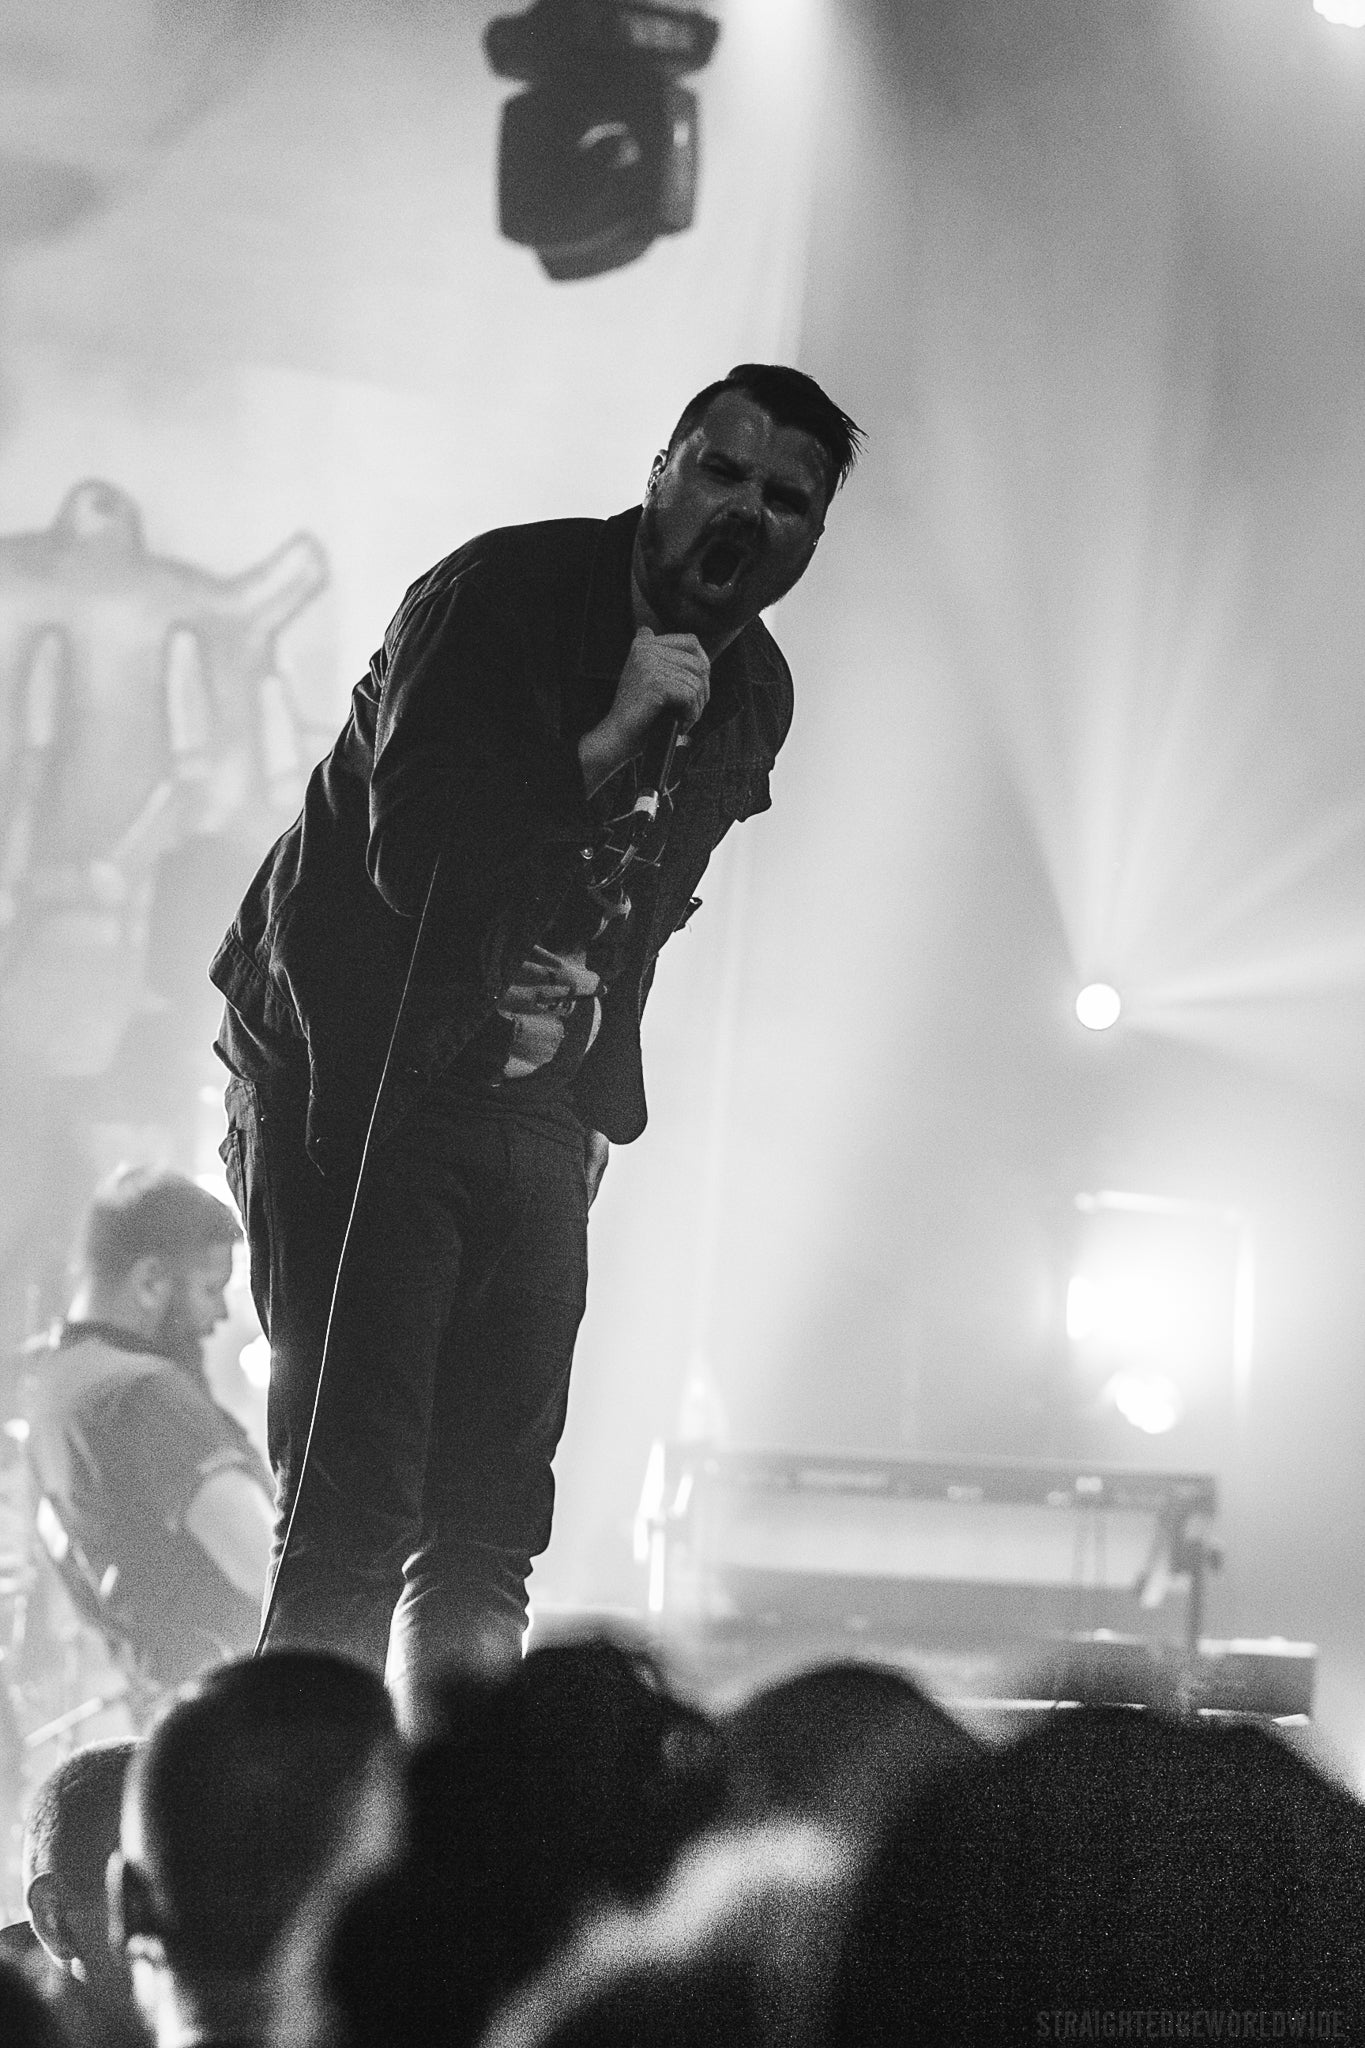 Silverstein at The Opera House in Toronto, December 2018, all photos by STRAIGHTEDGEWORLDWIDE